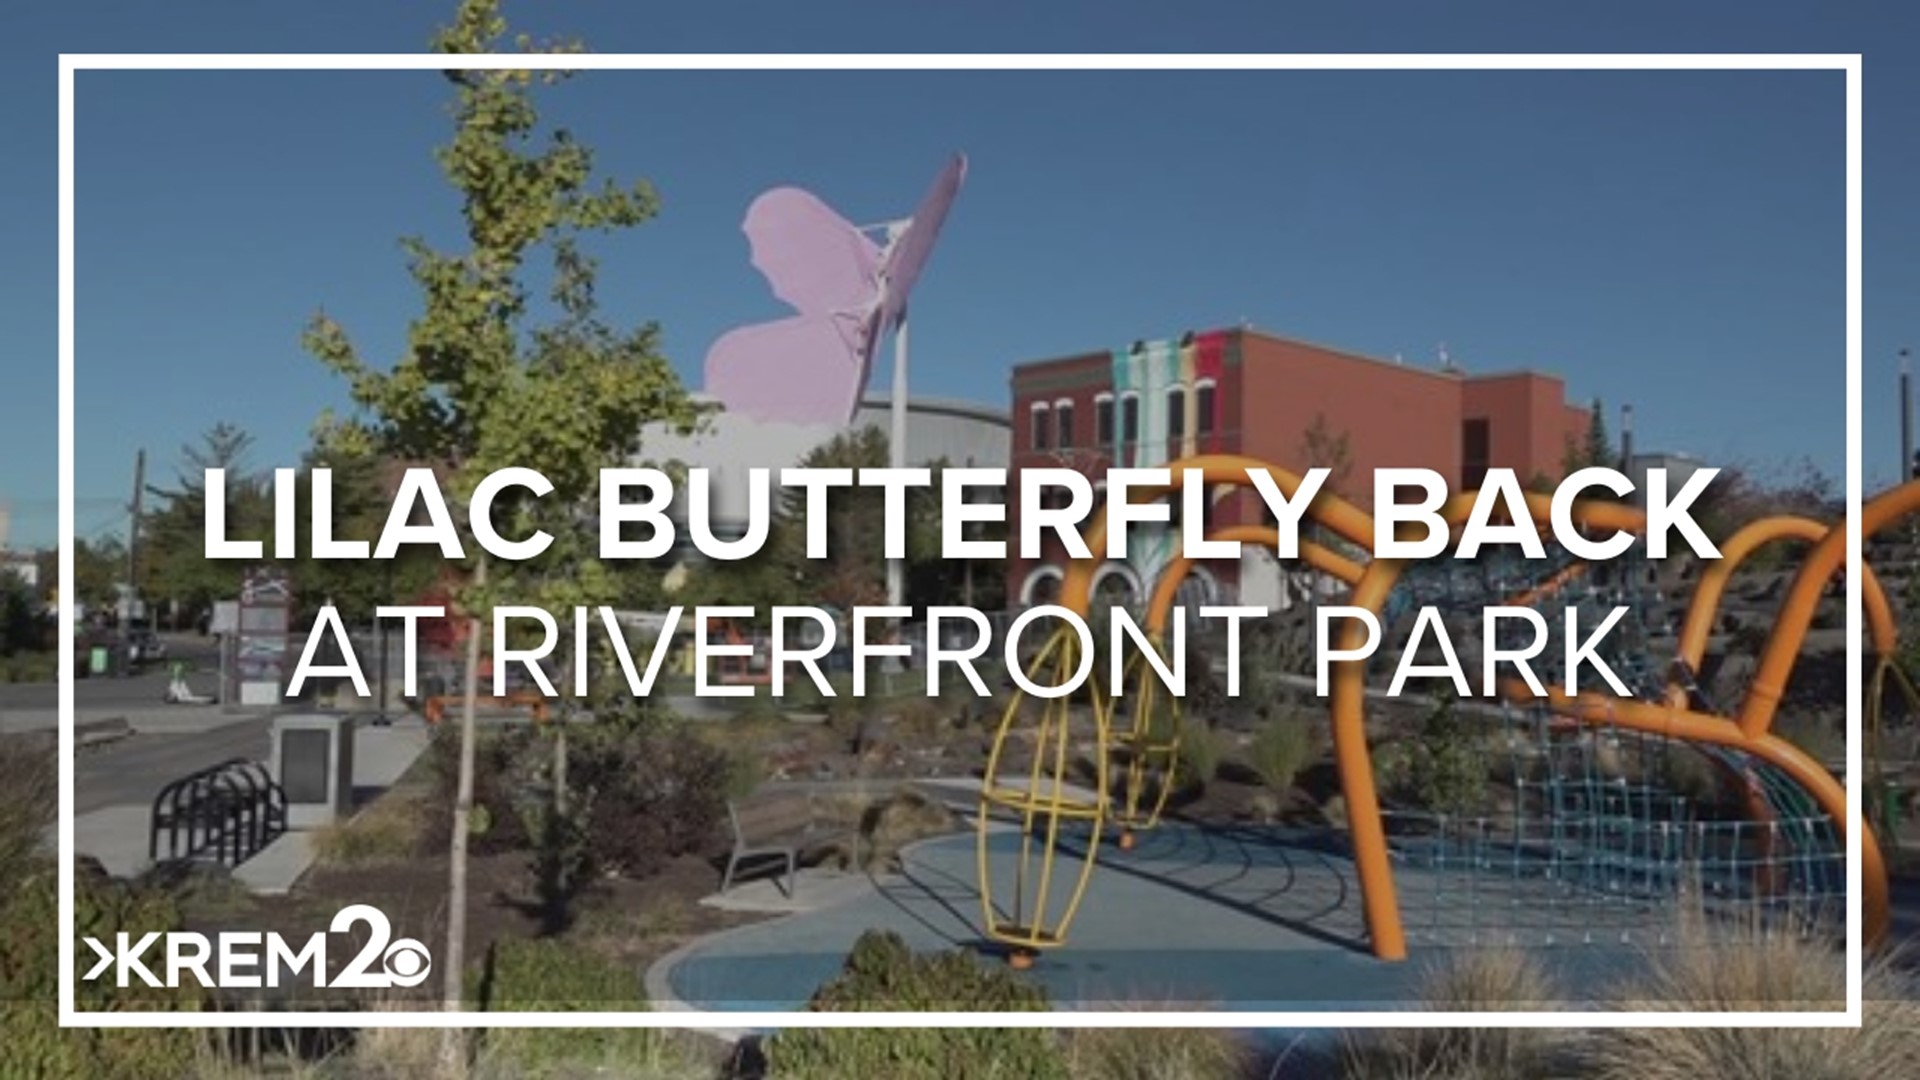 Originally built in 1974 for the Expo, the butterfly was brought down by a windstorm in 2021.